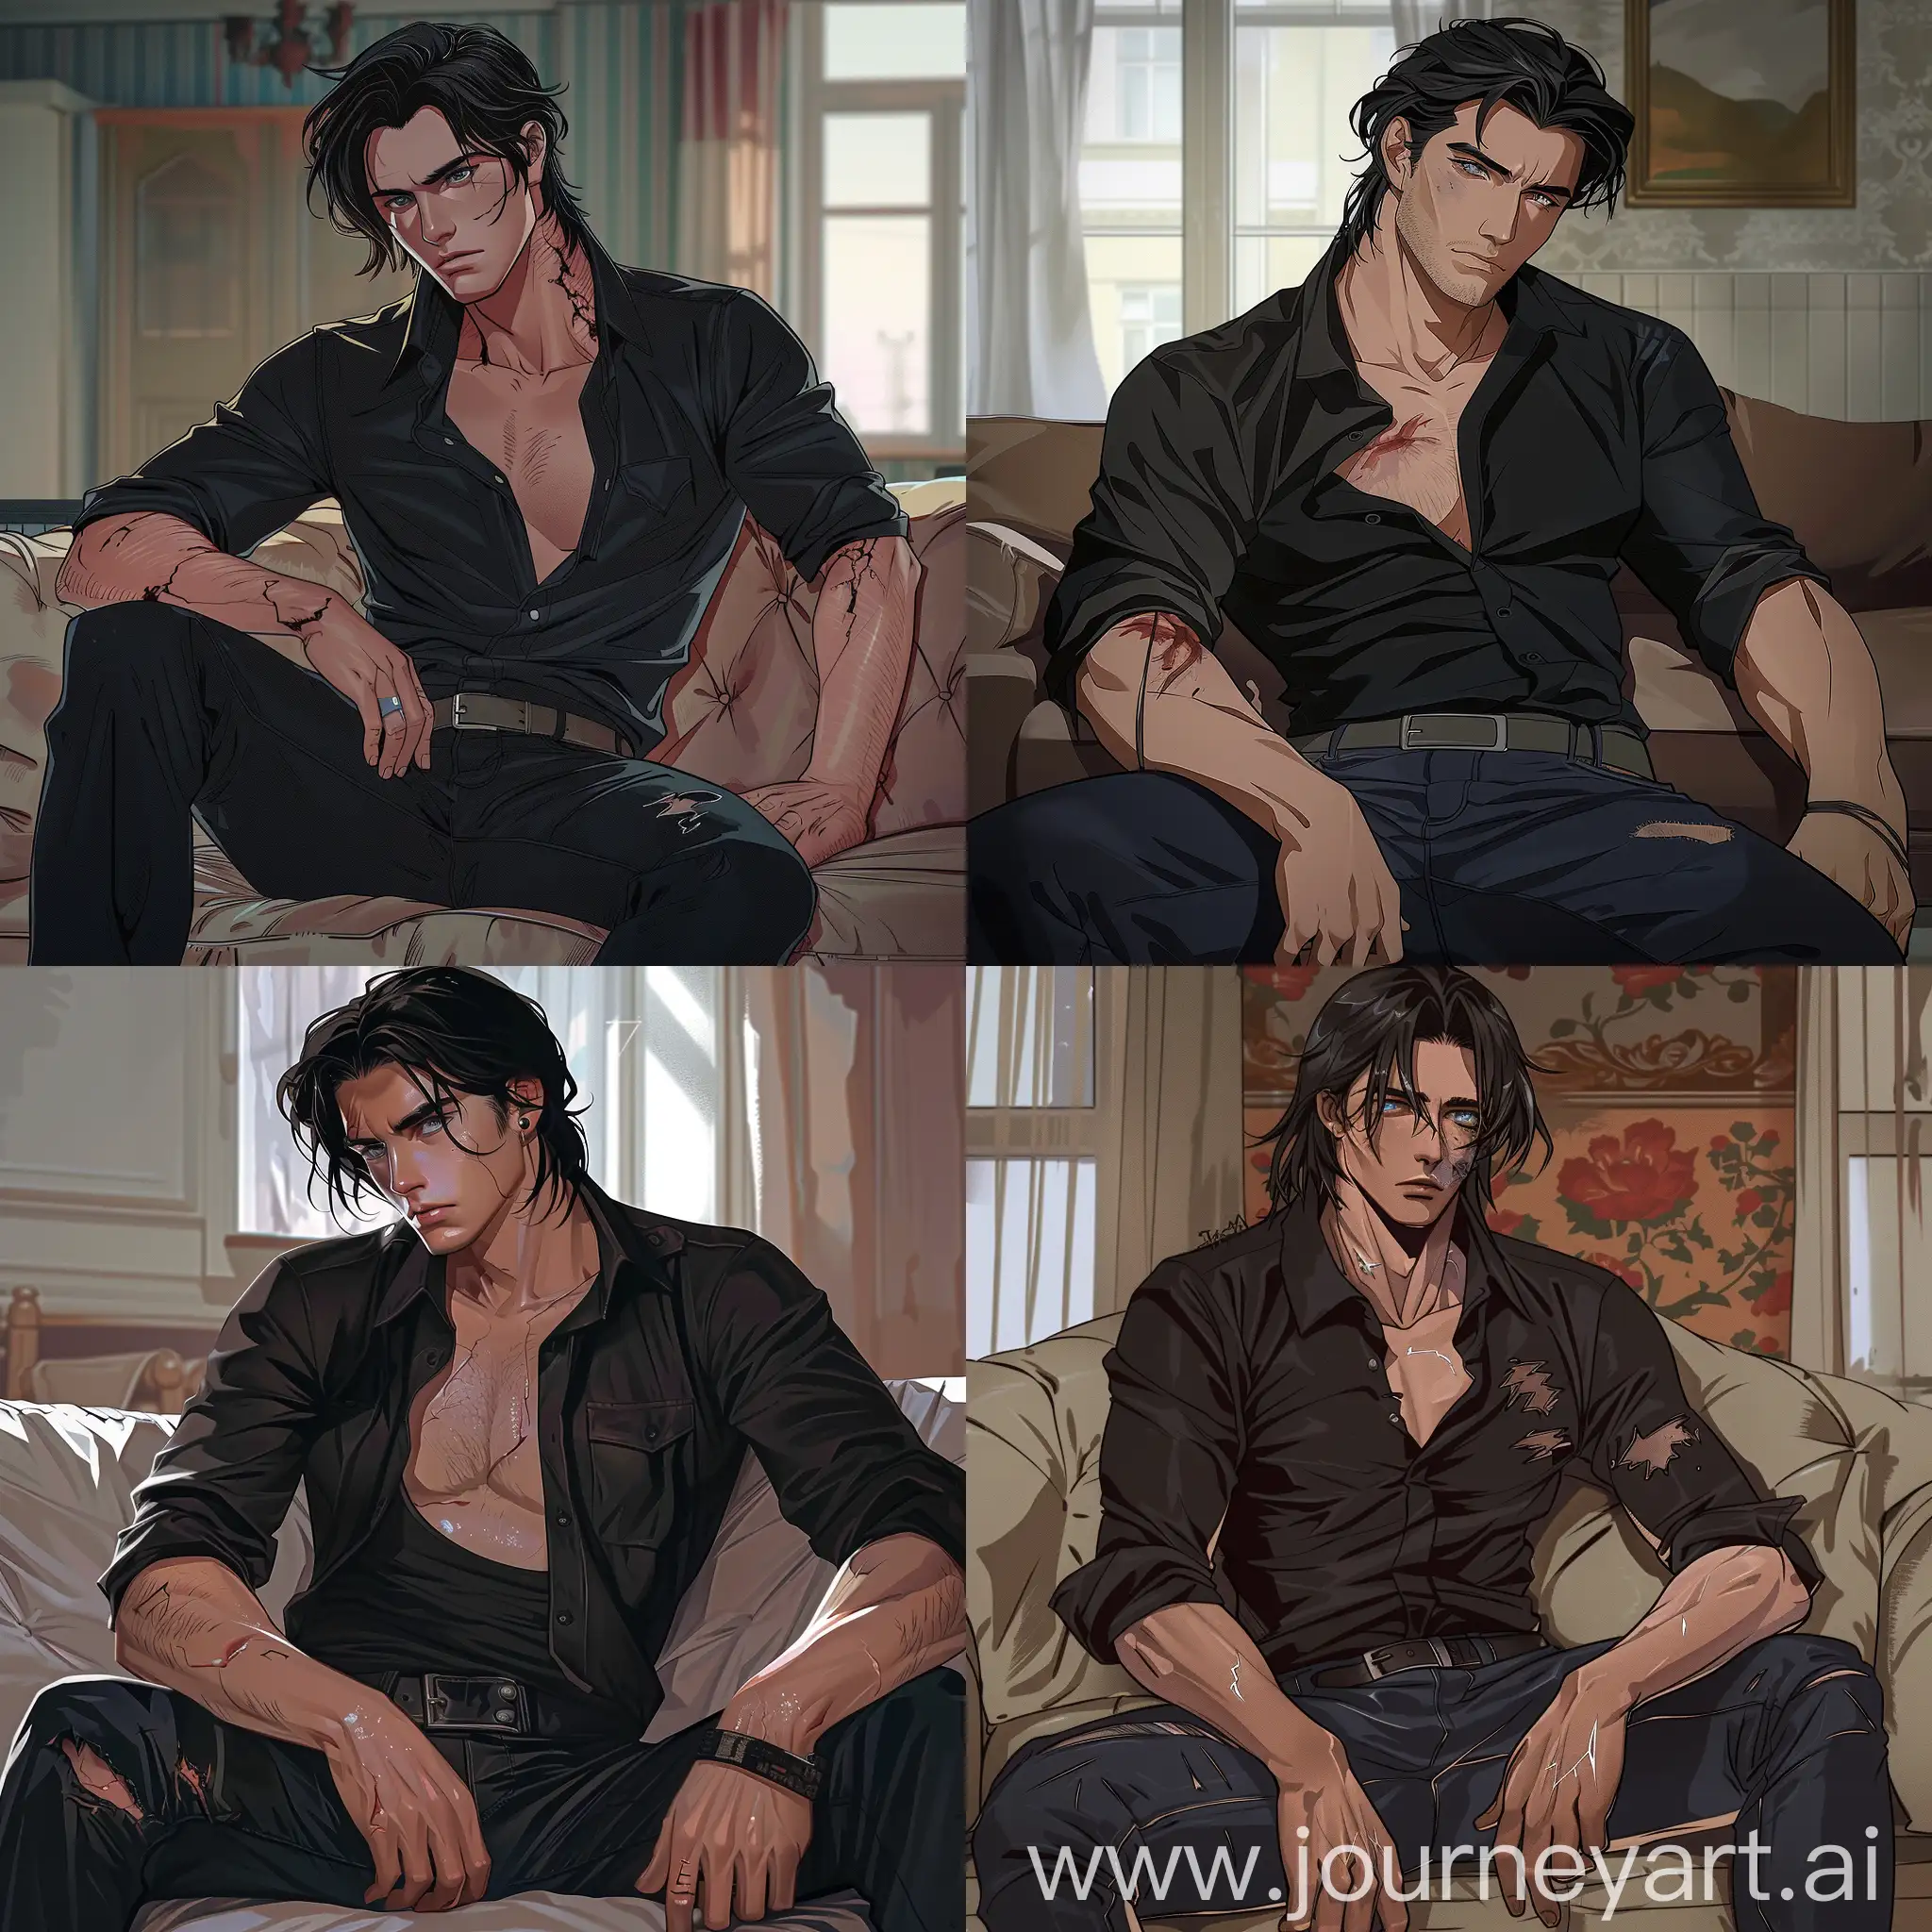 Dominant-Rich-Man-in-Anime-Style-Elegance-in-a-Soviet-Room